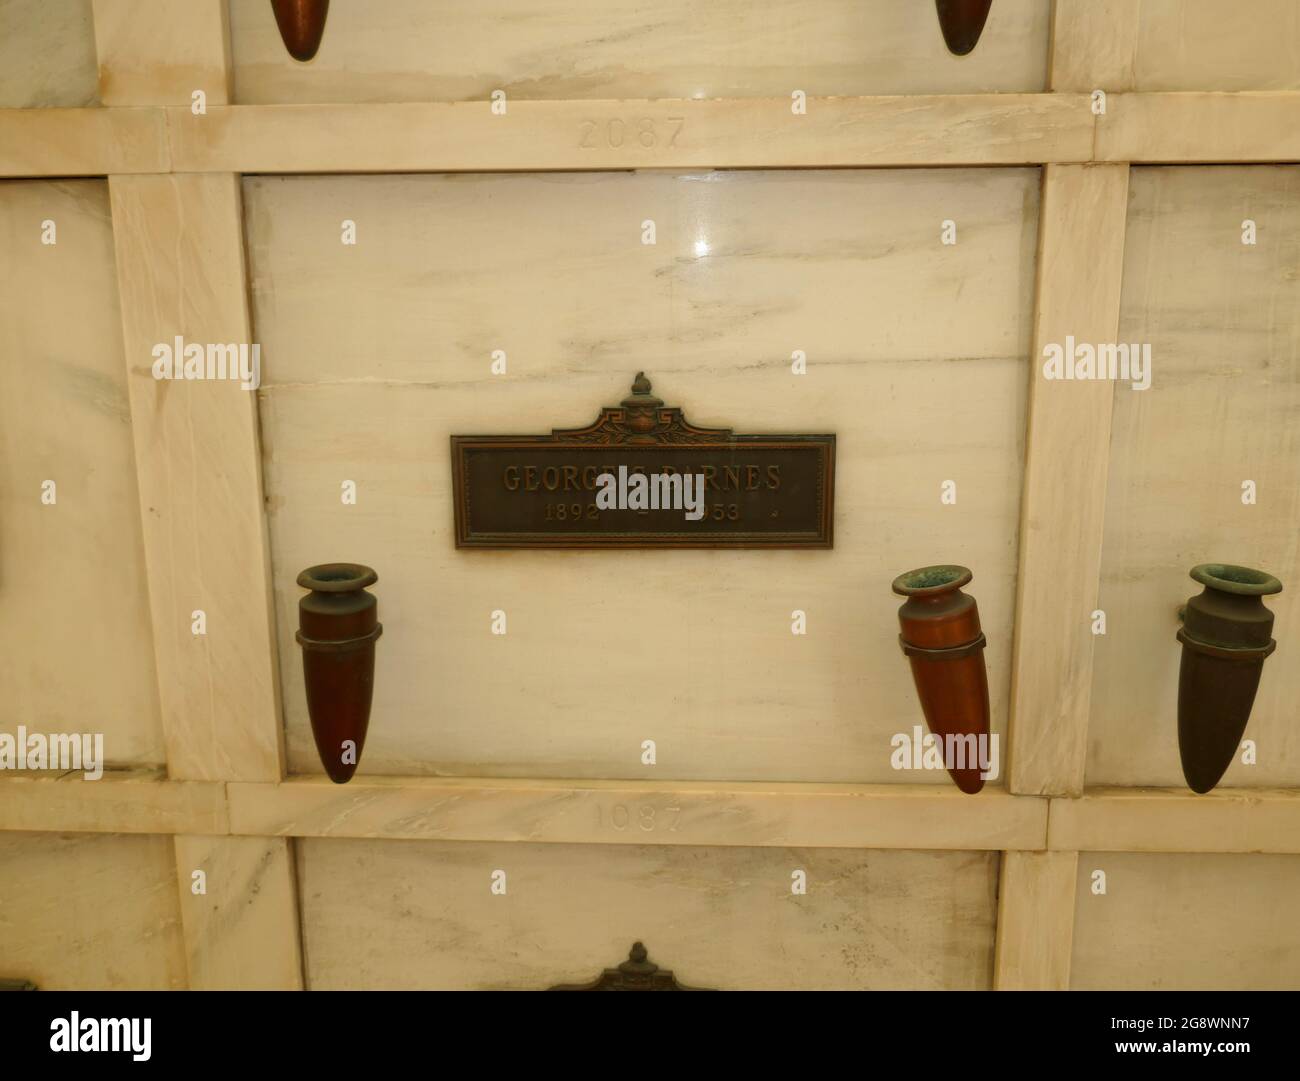 Los Angeles, California, USA 21st July 2021 A general view of atmosphere cinematographer George Barnes Grave in Abbey of the Psalms at Hollywood Forever Cemetery on July 21, 2021 in Los Angeles, California, USA. Photo by Barry King/Alamy Stock Photo Stock Photo